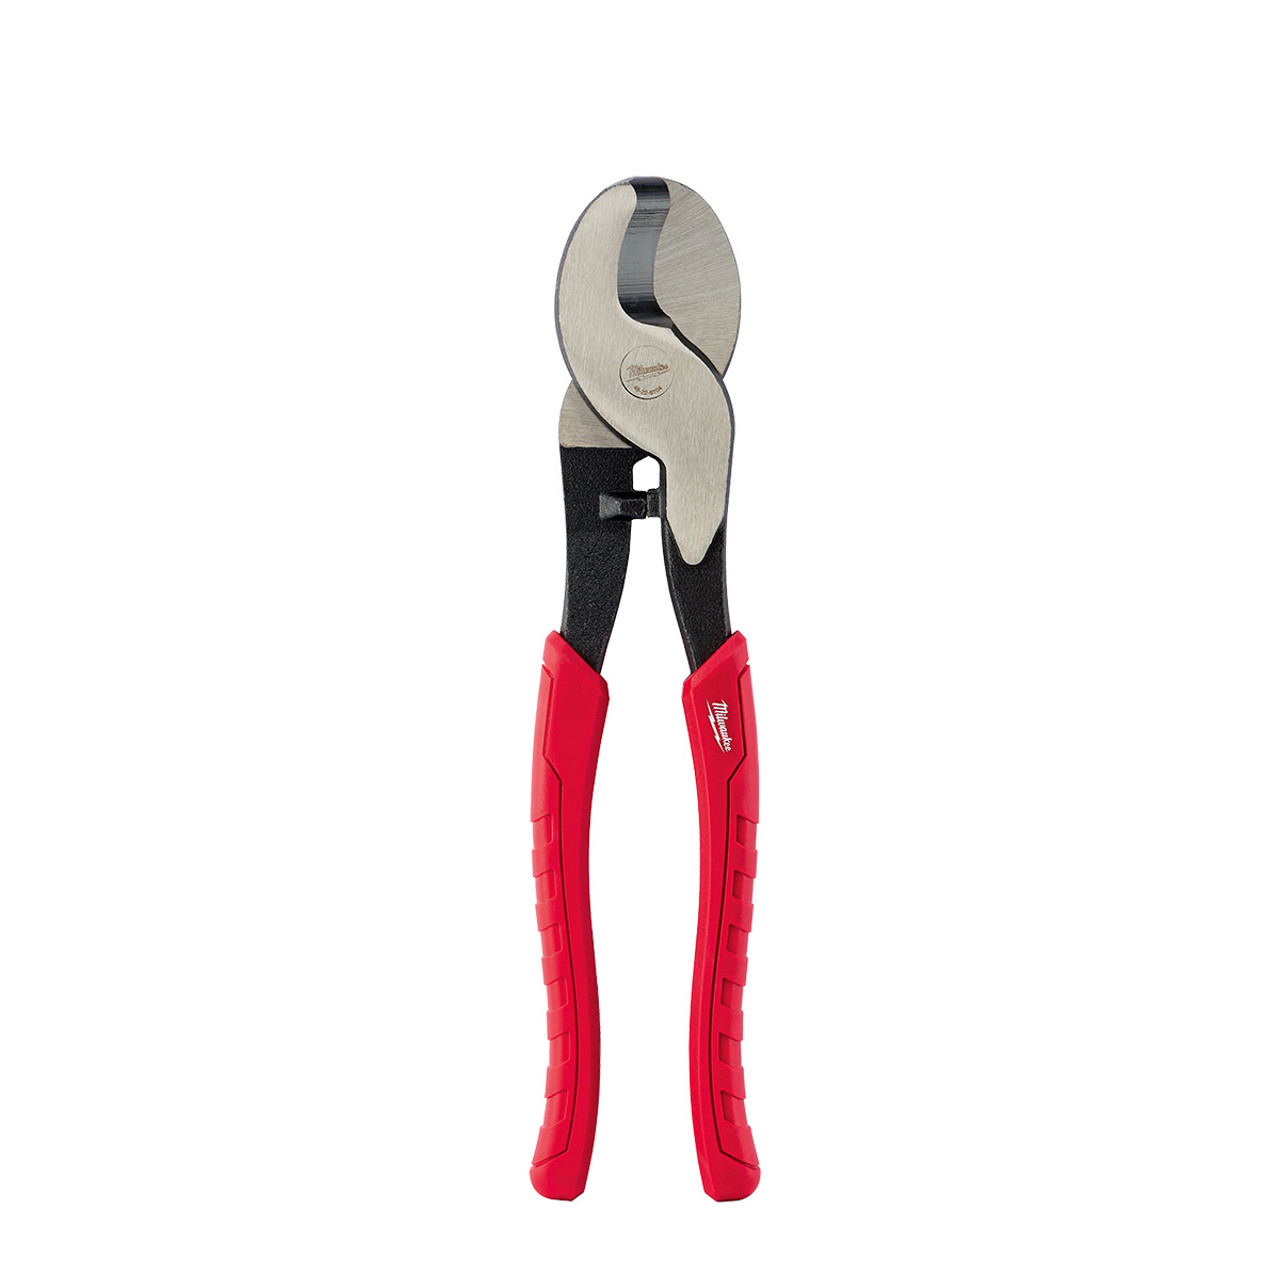 Comfort Grip Cable Cutting Pliers